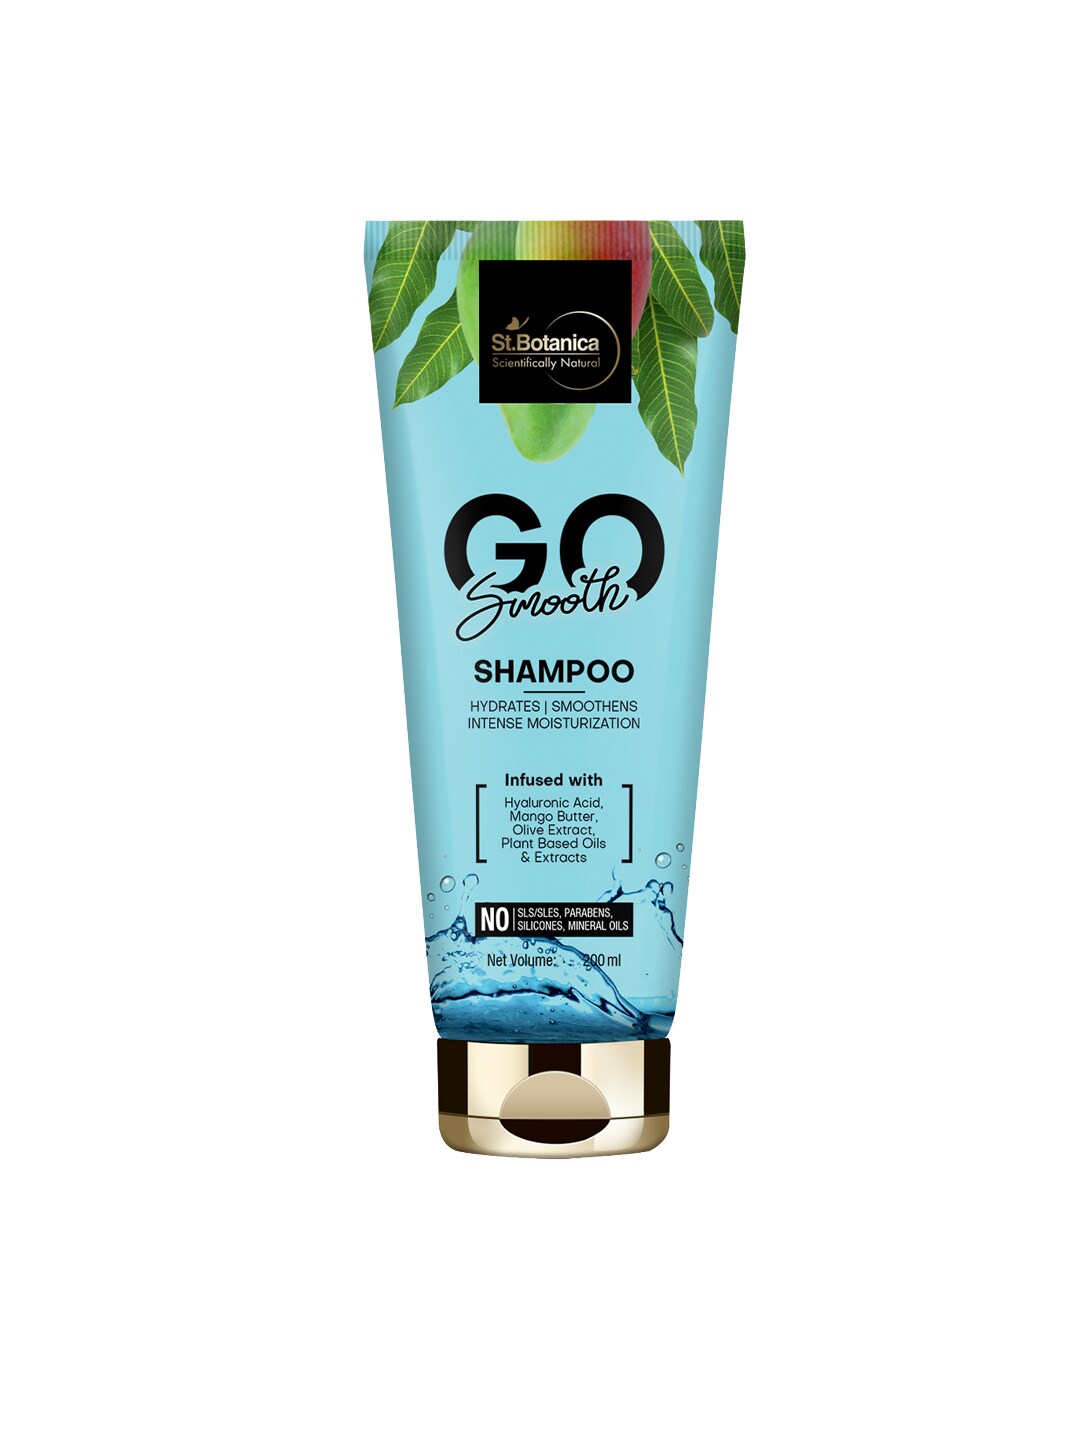 StBotanica Go Smooth Shampoo 200ml Price in India